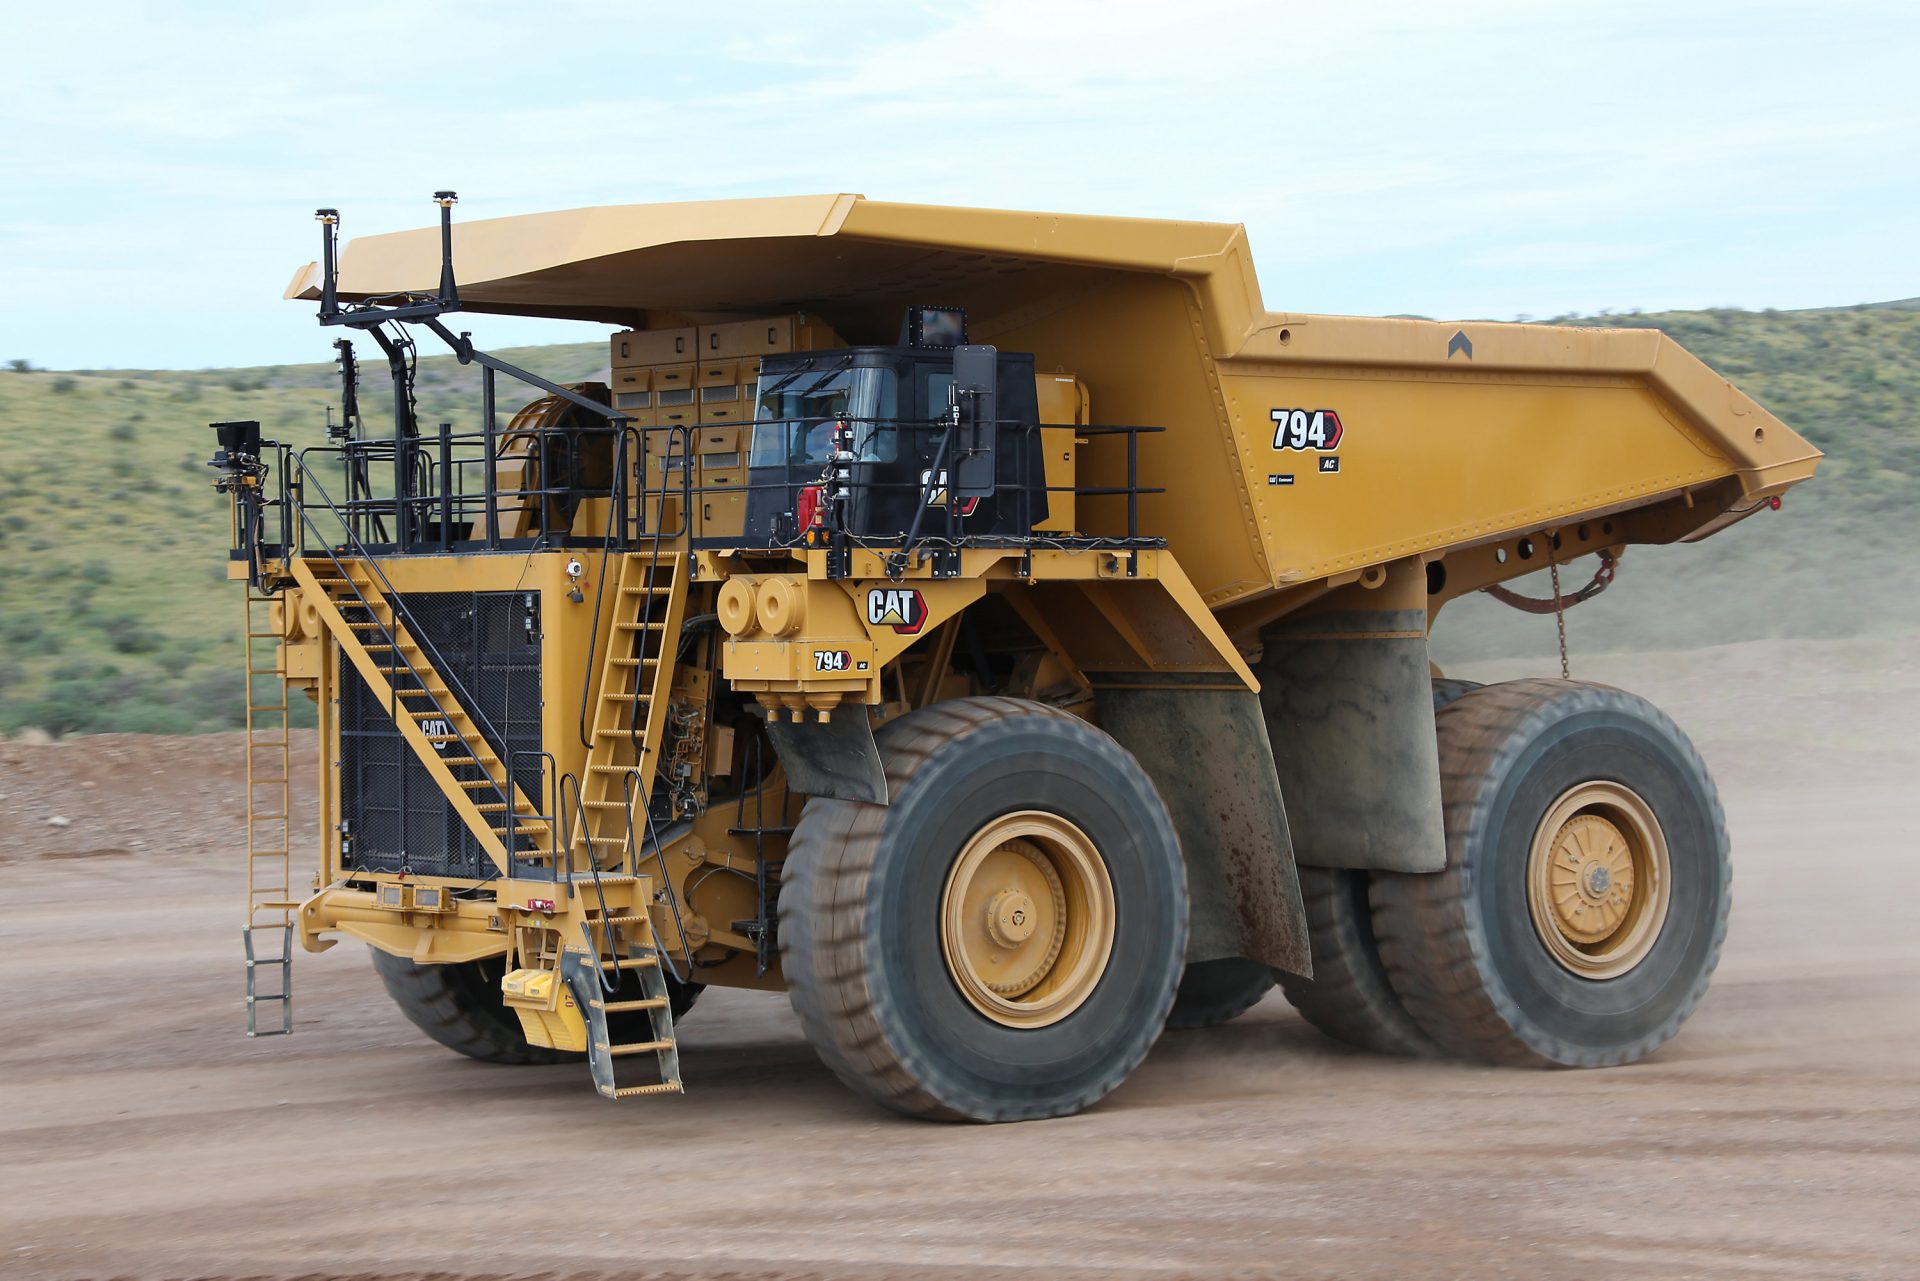 Caterpillar 794 large haul mining truck—an example of the trucks to be deployed by Teck Resources.